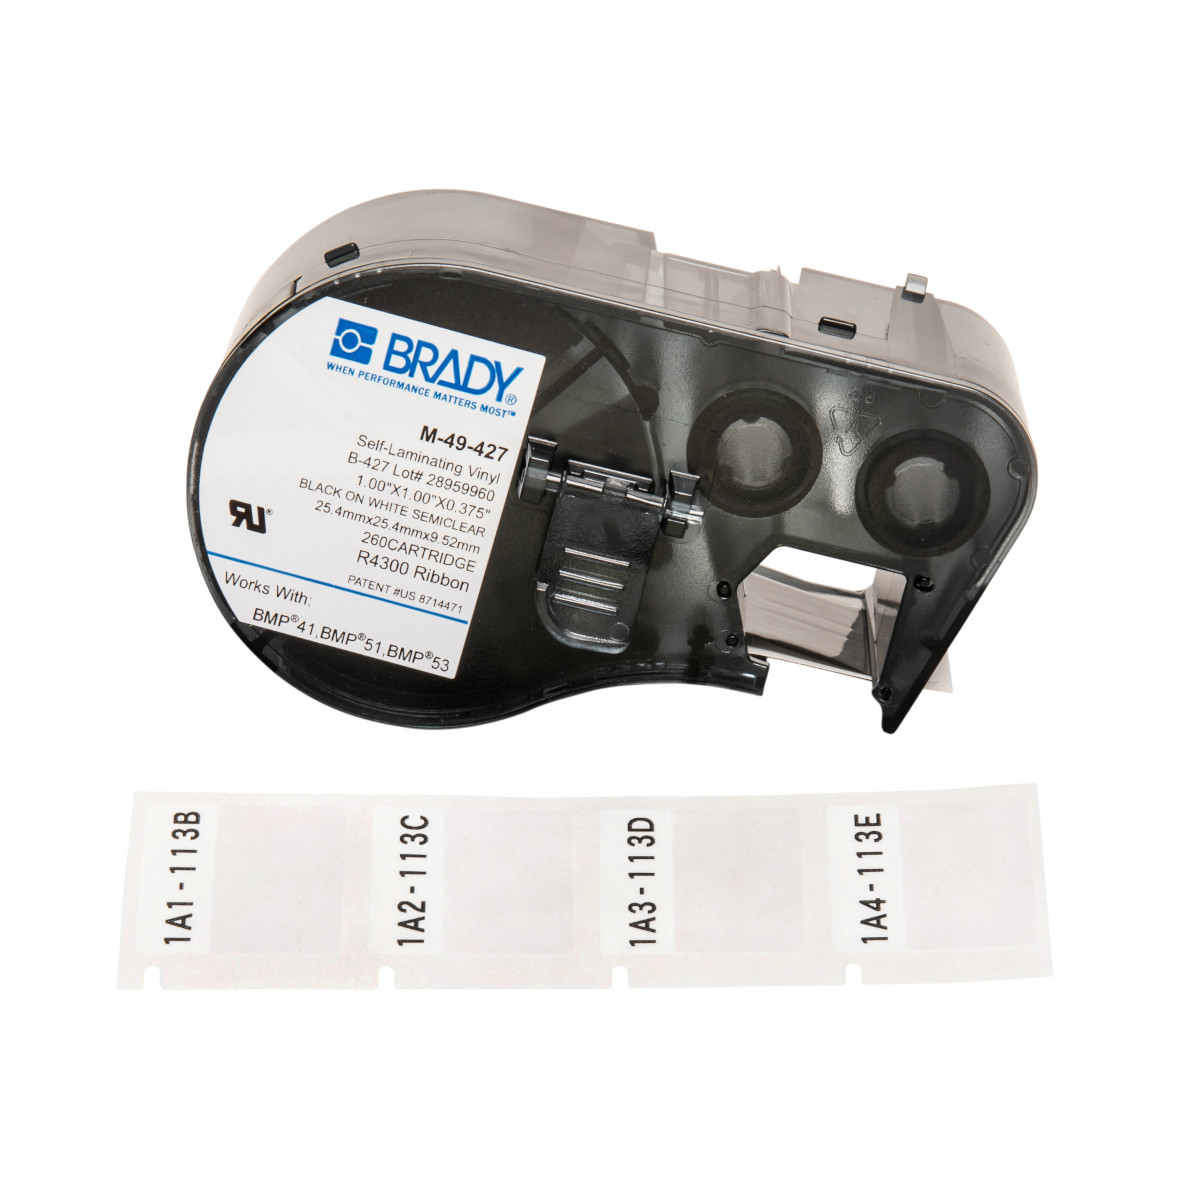 and BMP53 Label Makers BMP51 Black on White Compatible with BMP41 Brady Self-Laminating Vinyl Label Tape M-48-427 M-48-427 Translucent Tape 1 Height.375 Width 1 Height.375 Width and BMP53 Label Makers 